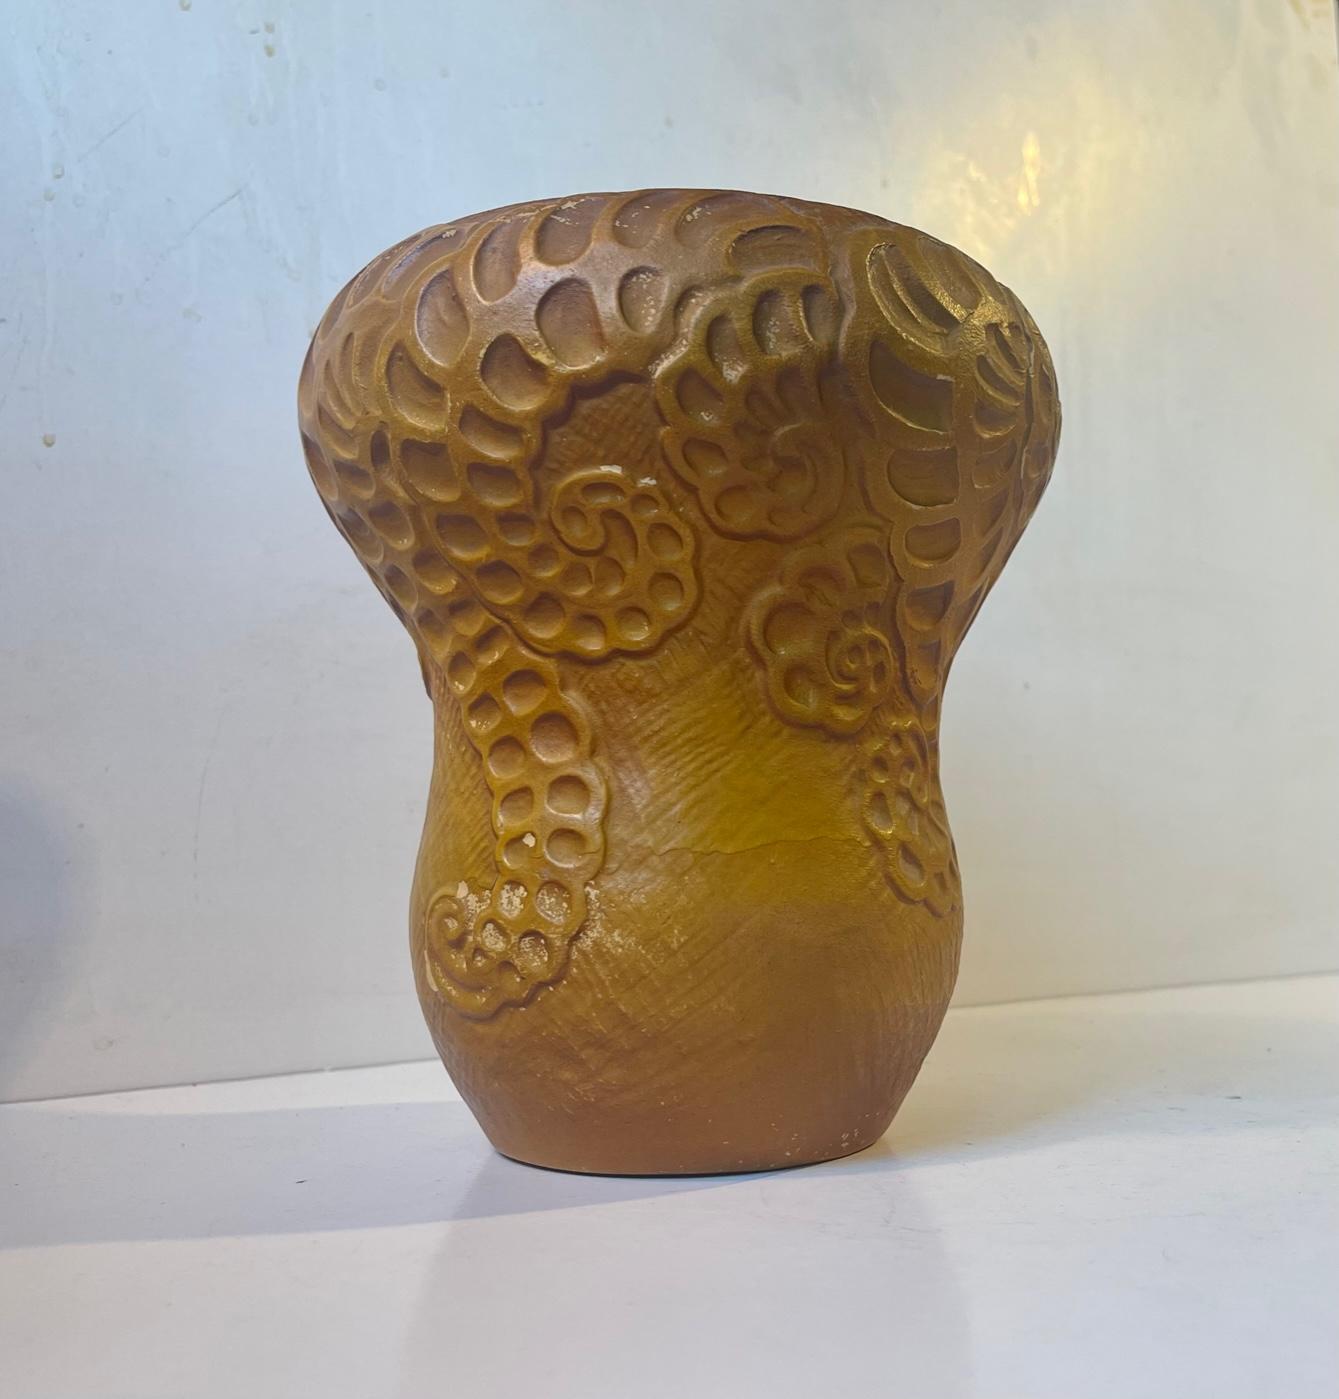 Unique pottery/terracotta vase in a gourd shape. Decorated in relief with squid tentacles and hand-painted. Distinct art nouveau - jugend styling. It was made at the workshop of Michael Andersen & Son in Denmark between 1908-16. Measurements: